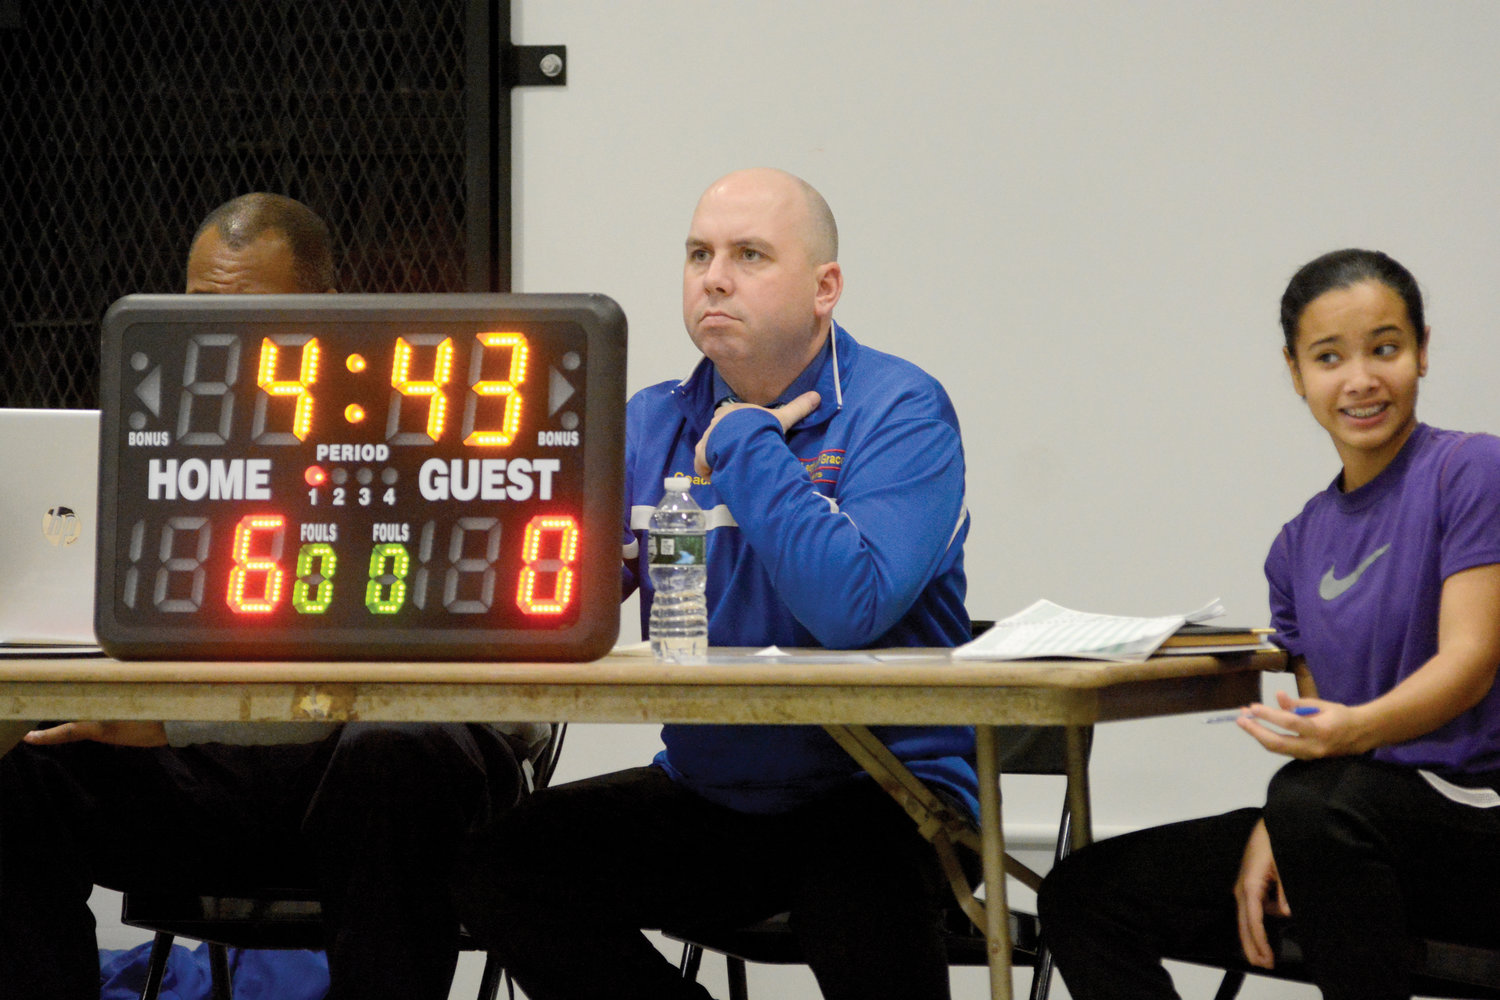 Principal Rich Helmrich operates the scoreboard at the scorer’s table.